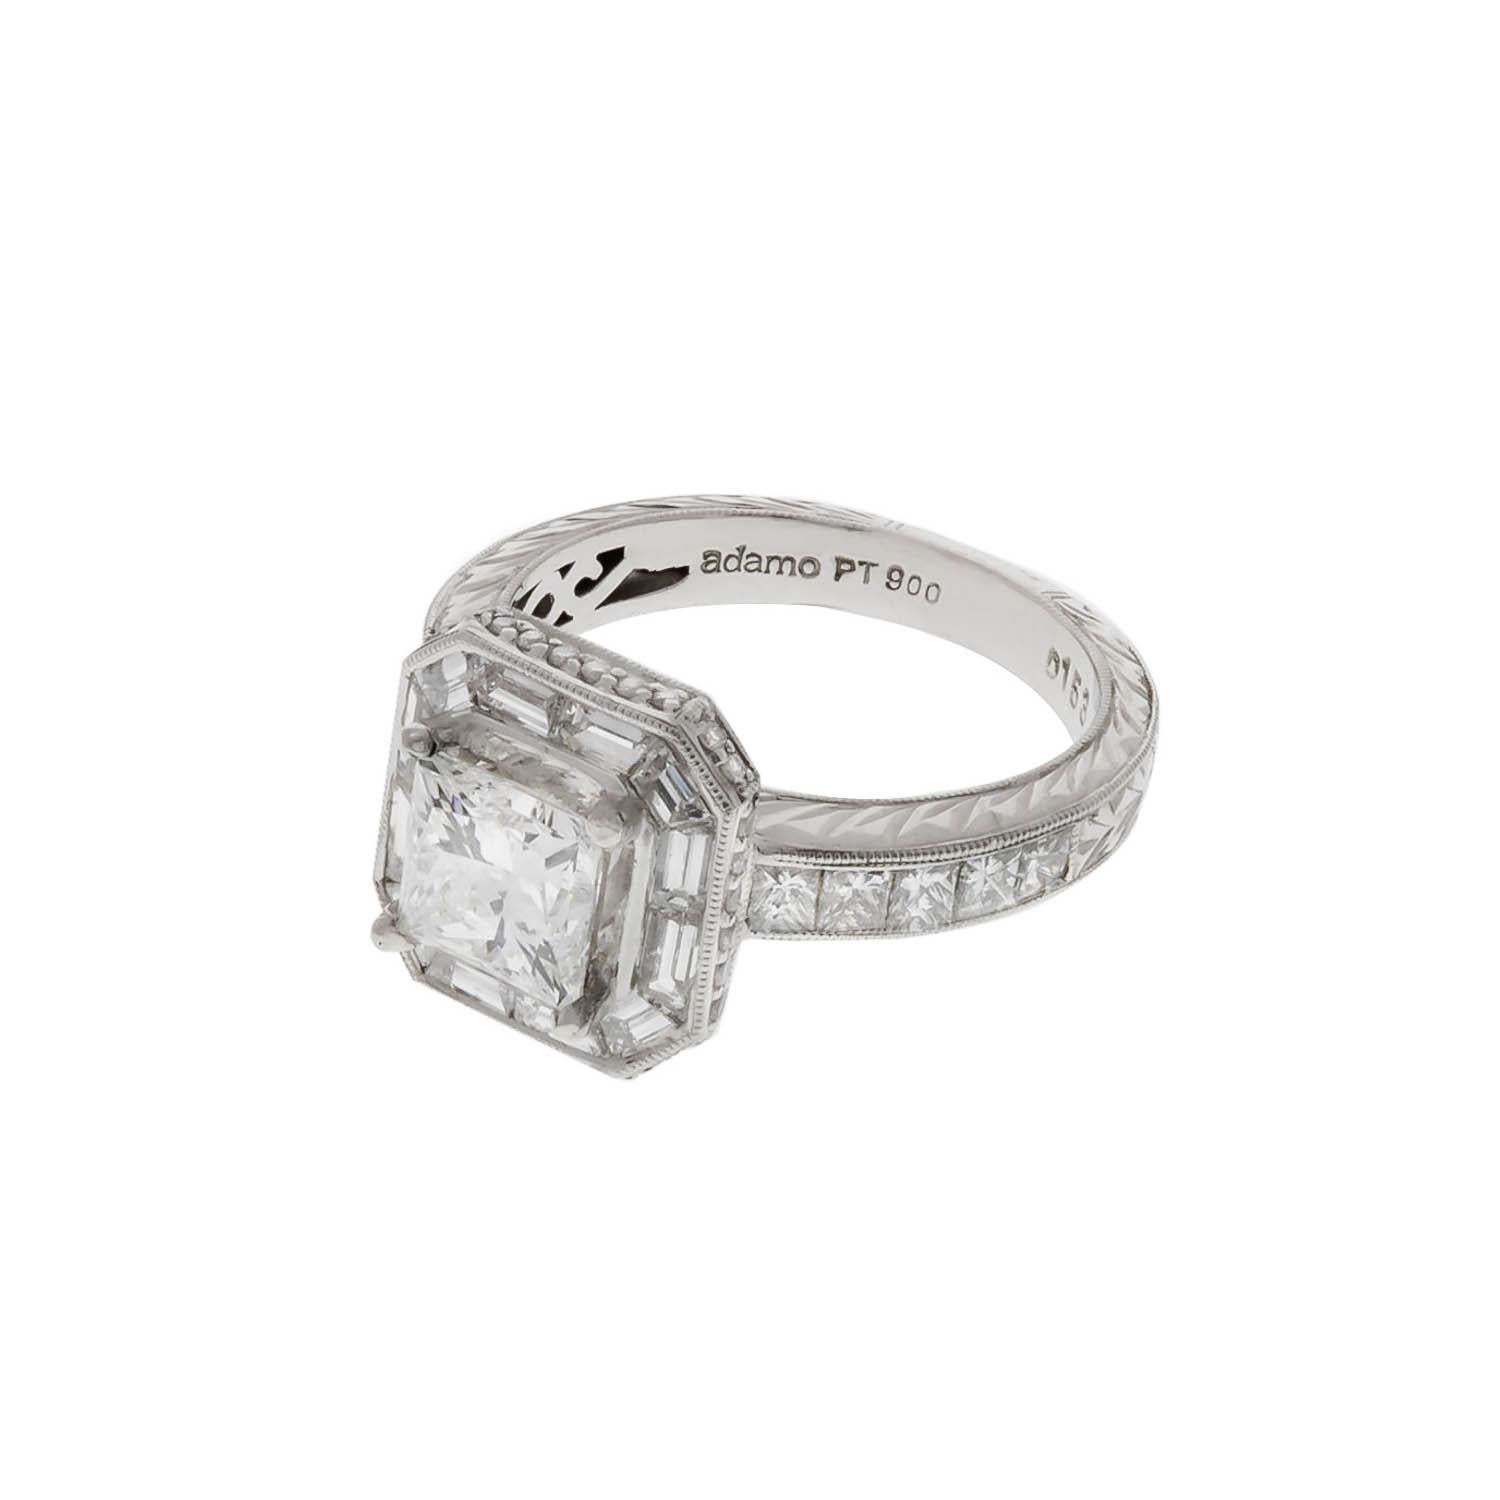 Platinum ring containing as a center stone a 1.57 carats Princess cut diamond  E color, VS2 clarity. The center diamond is surround by a bezel containing baguette and round diamonds. The shank is engraved and contains 10 princess cut diamonds.
Size